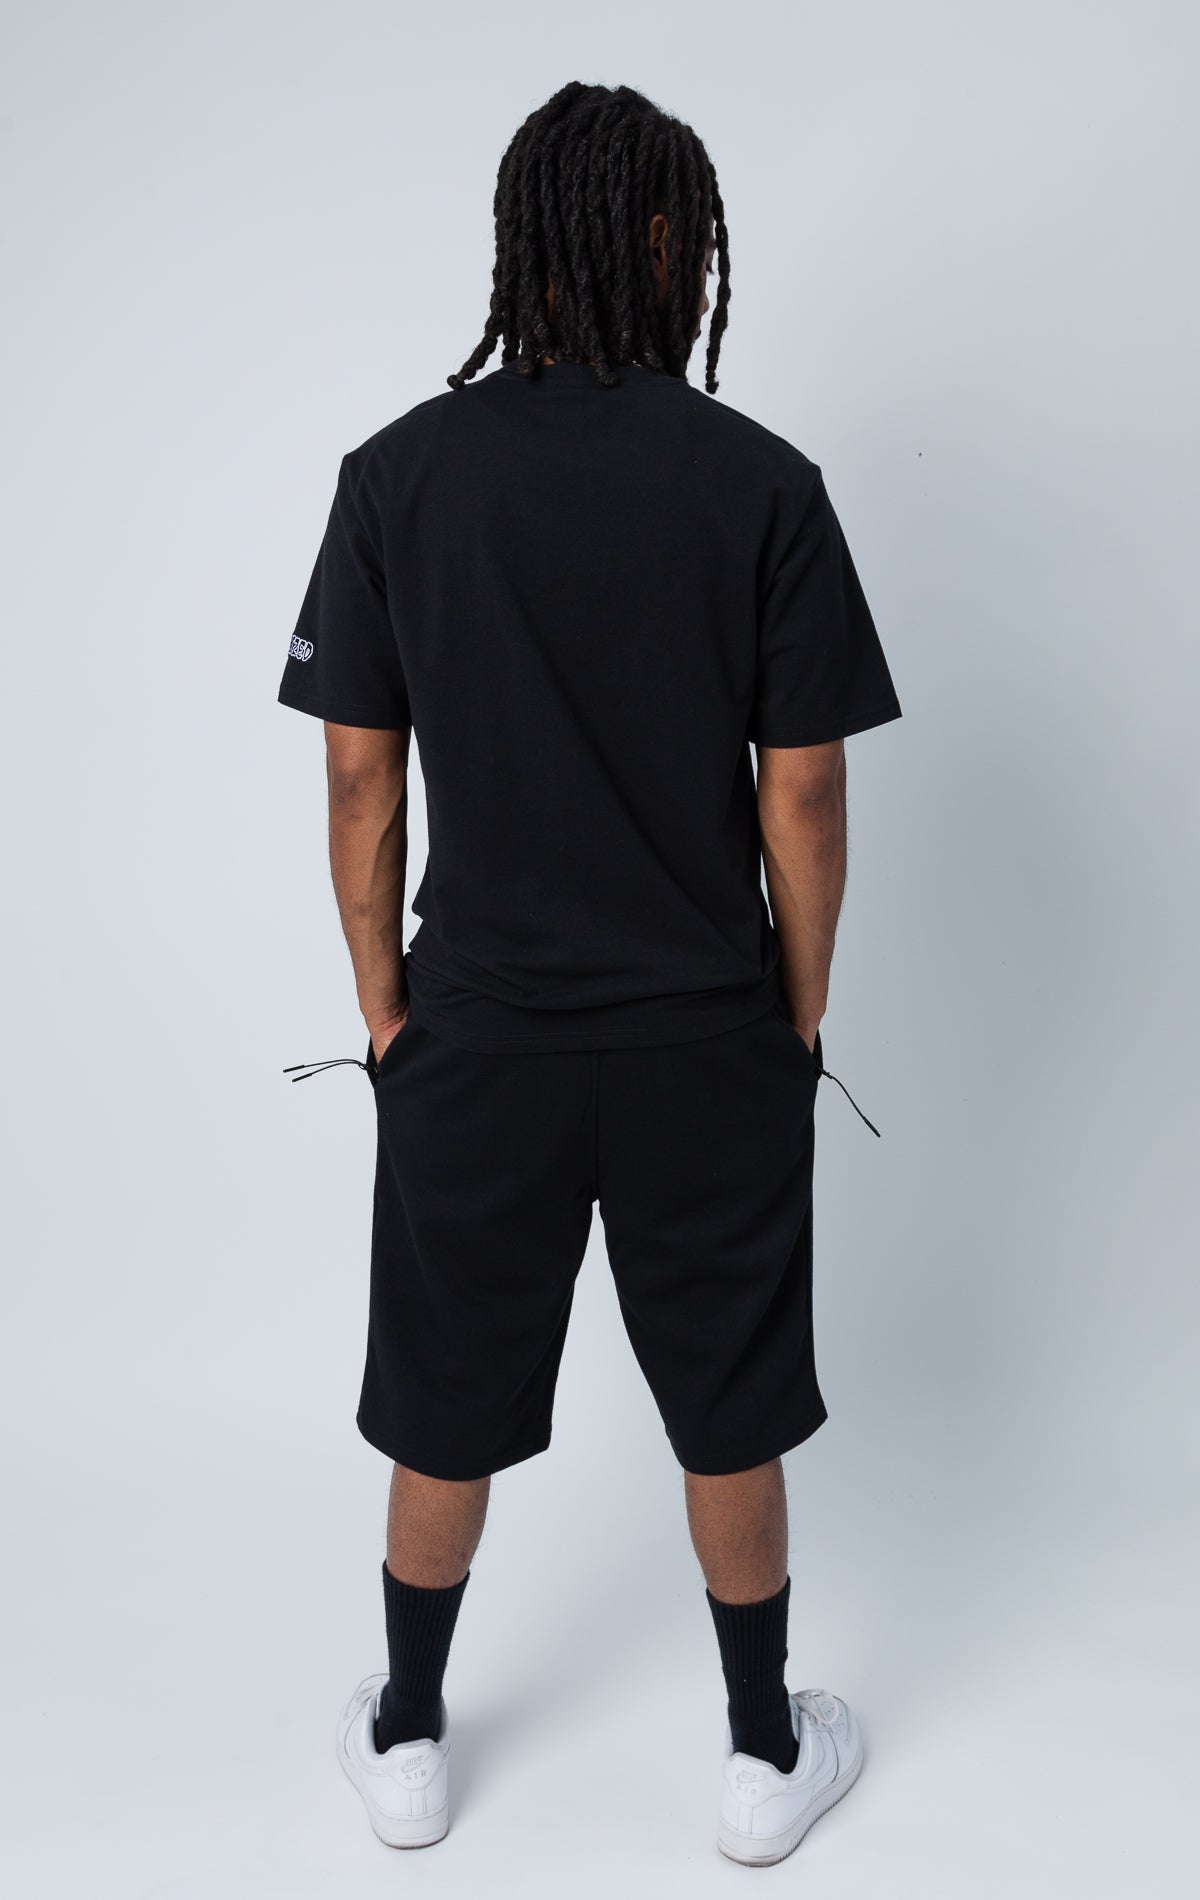 Back side of black set of shirt and shorts with "LOVE" graphic.